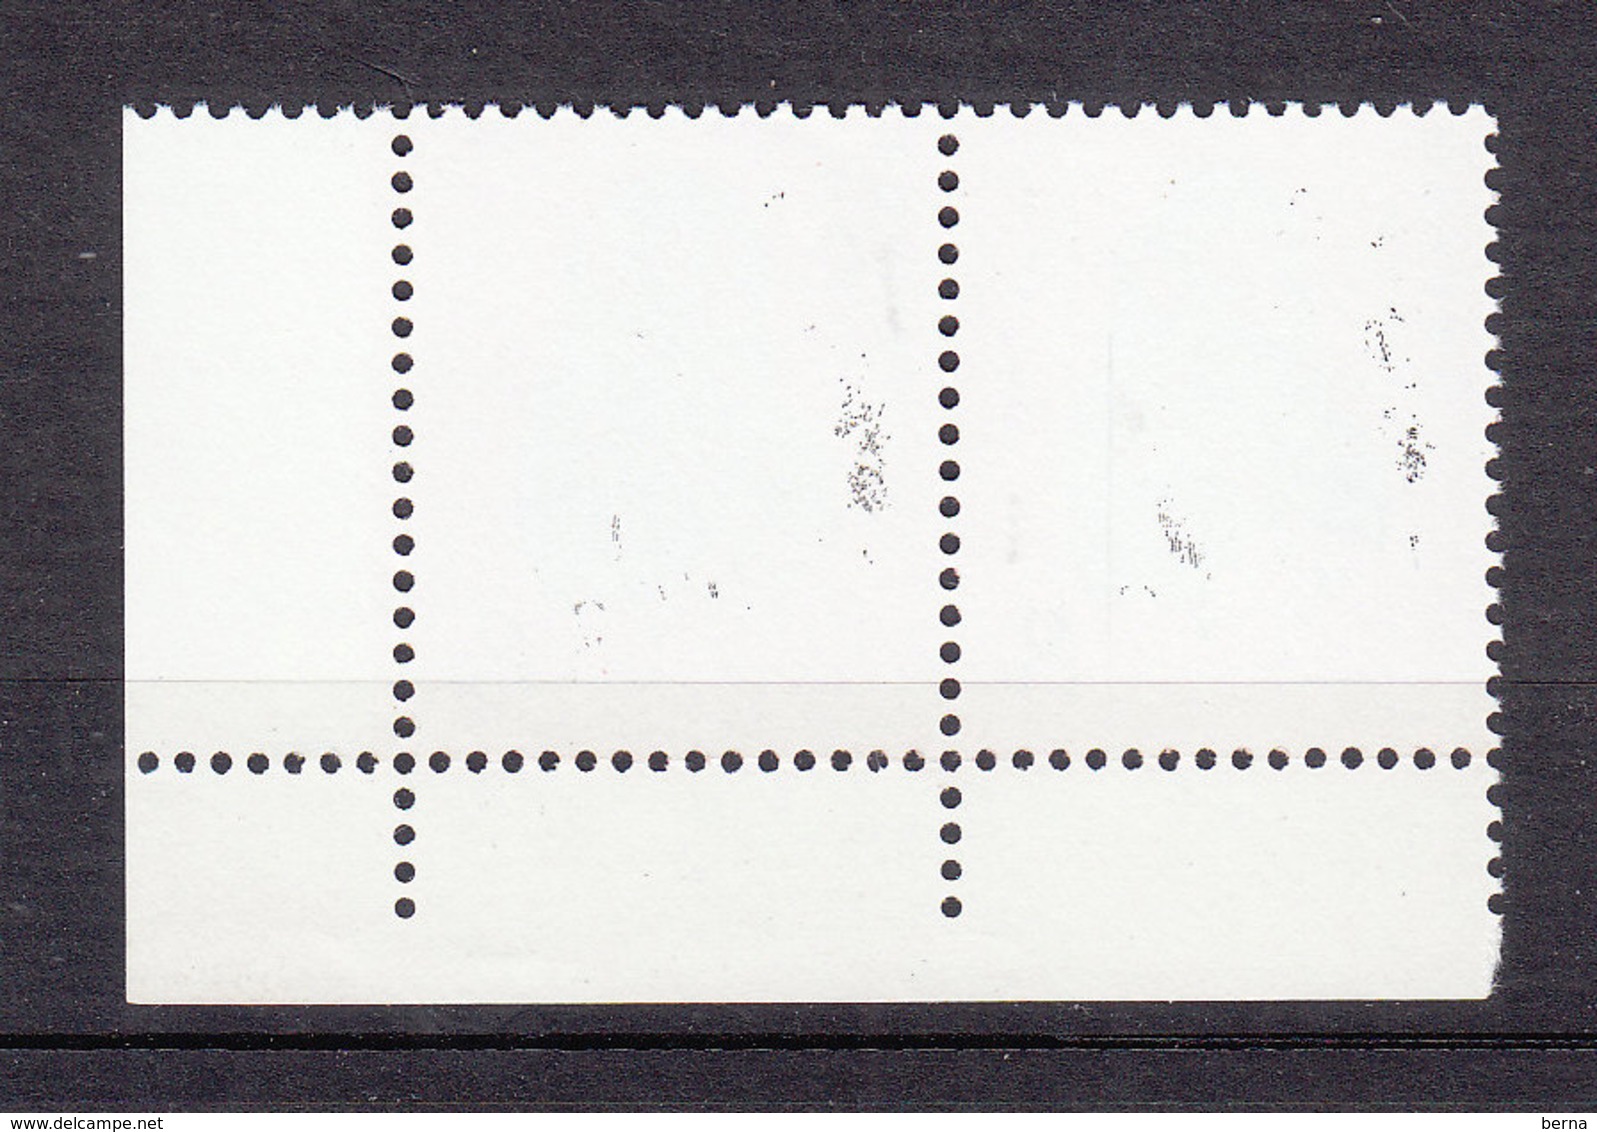 CHINA MONKEY SG 2968 PAIR CORNER SHEET NEW YEAR 1980 MNH -LIGHT BLACK MARKS AT REVERSE AS USUAL. READ SELLING CONDITIONS - Neufs